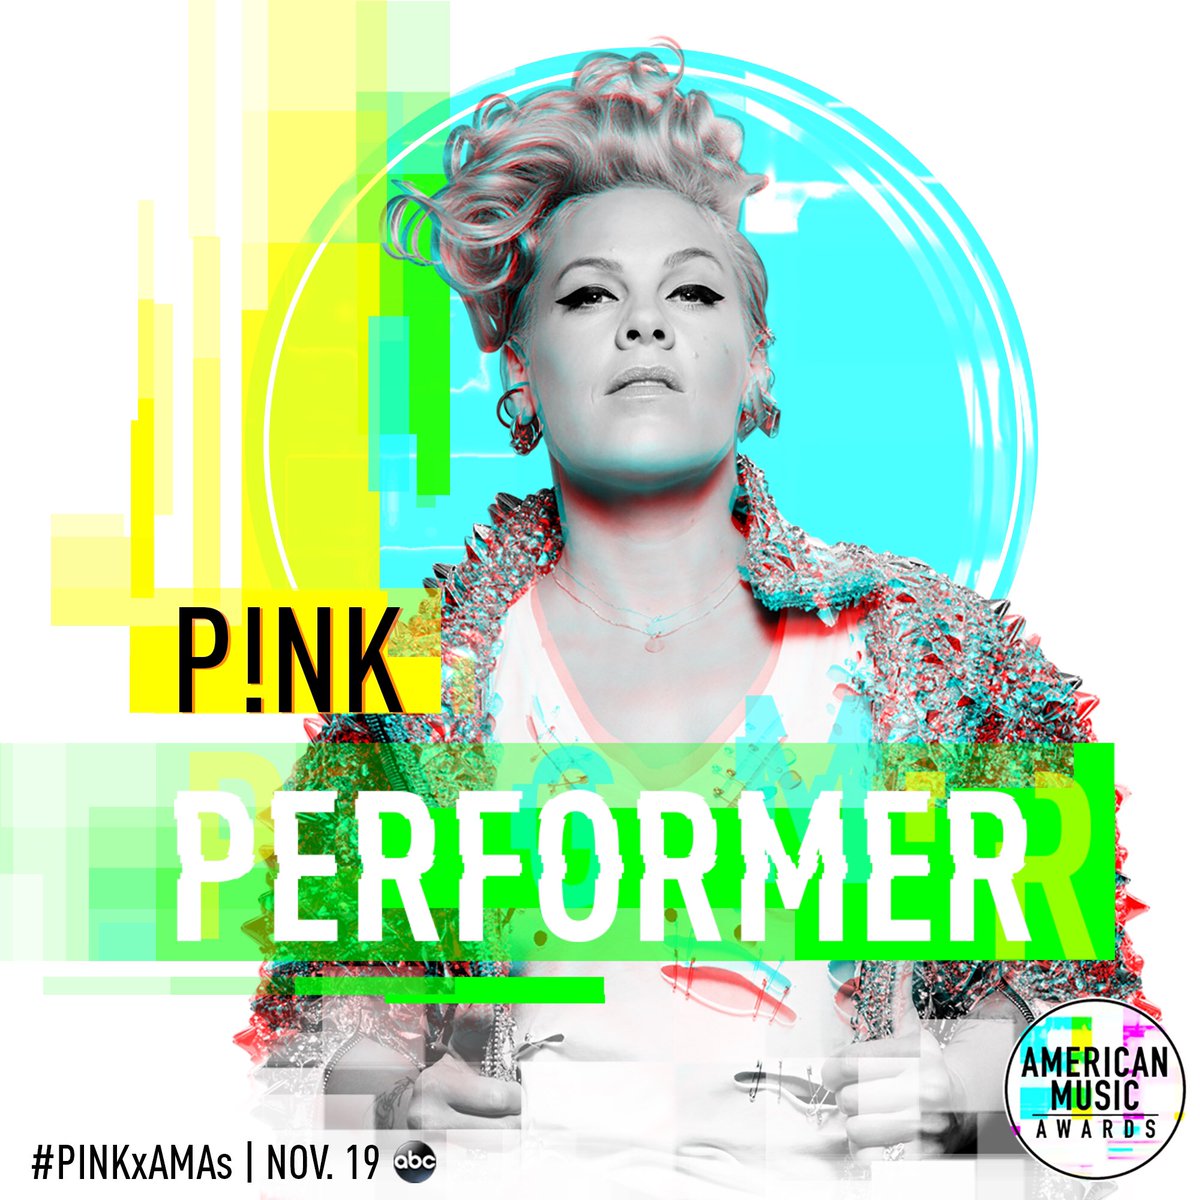 “Taking on the @AMAs with my most daring performance to date! You ready? See you 11.19 on ABC. #PINKxAMAs” https://t.co/6YSXlQBpGY